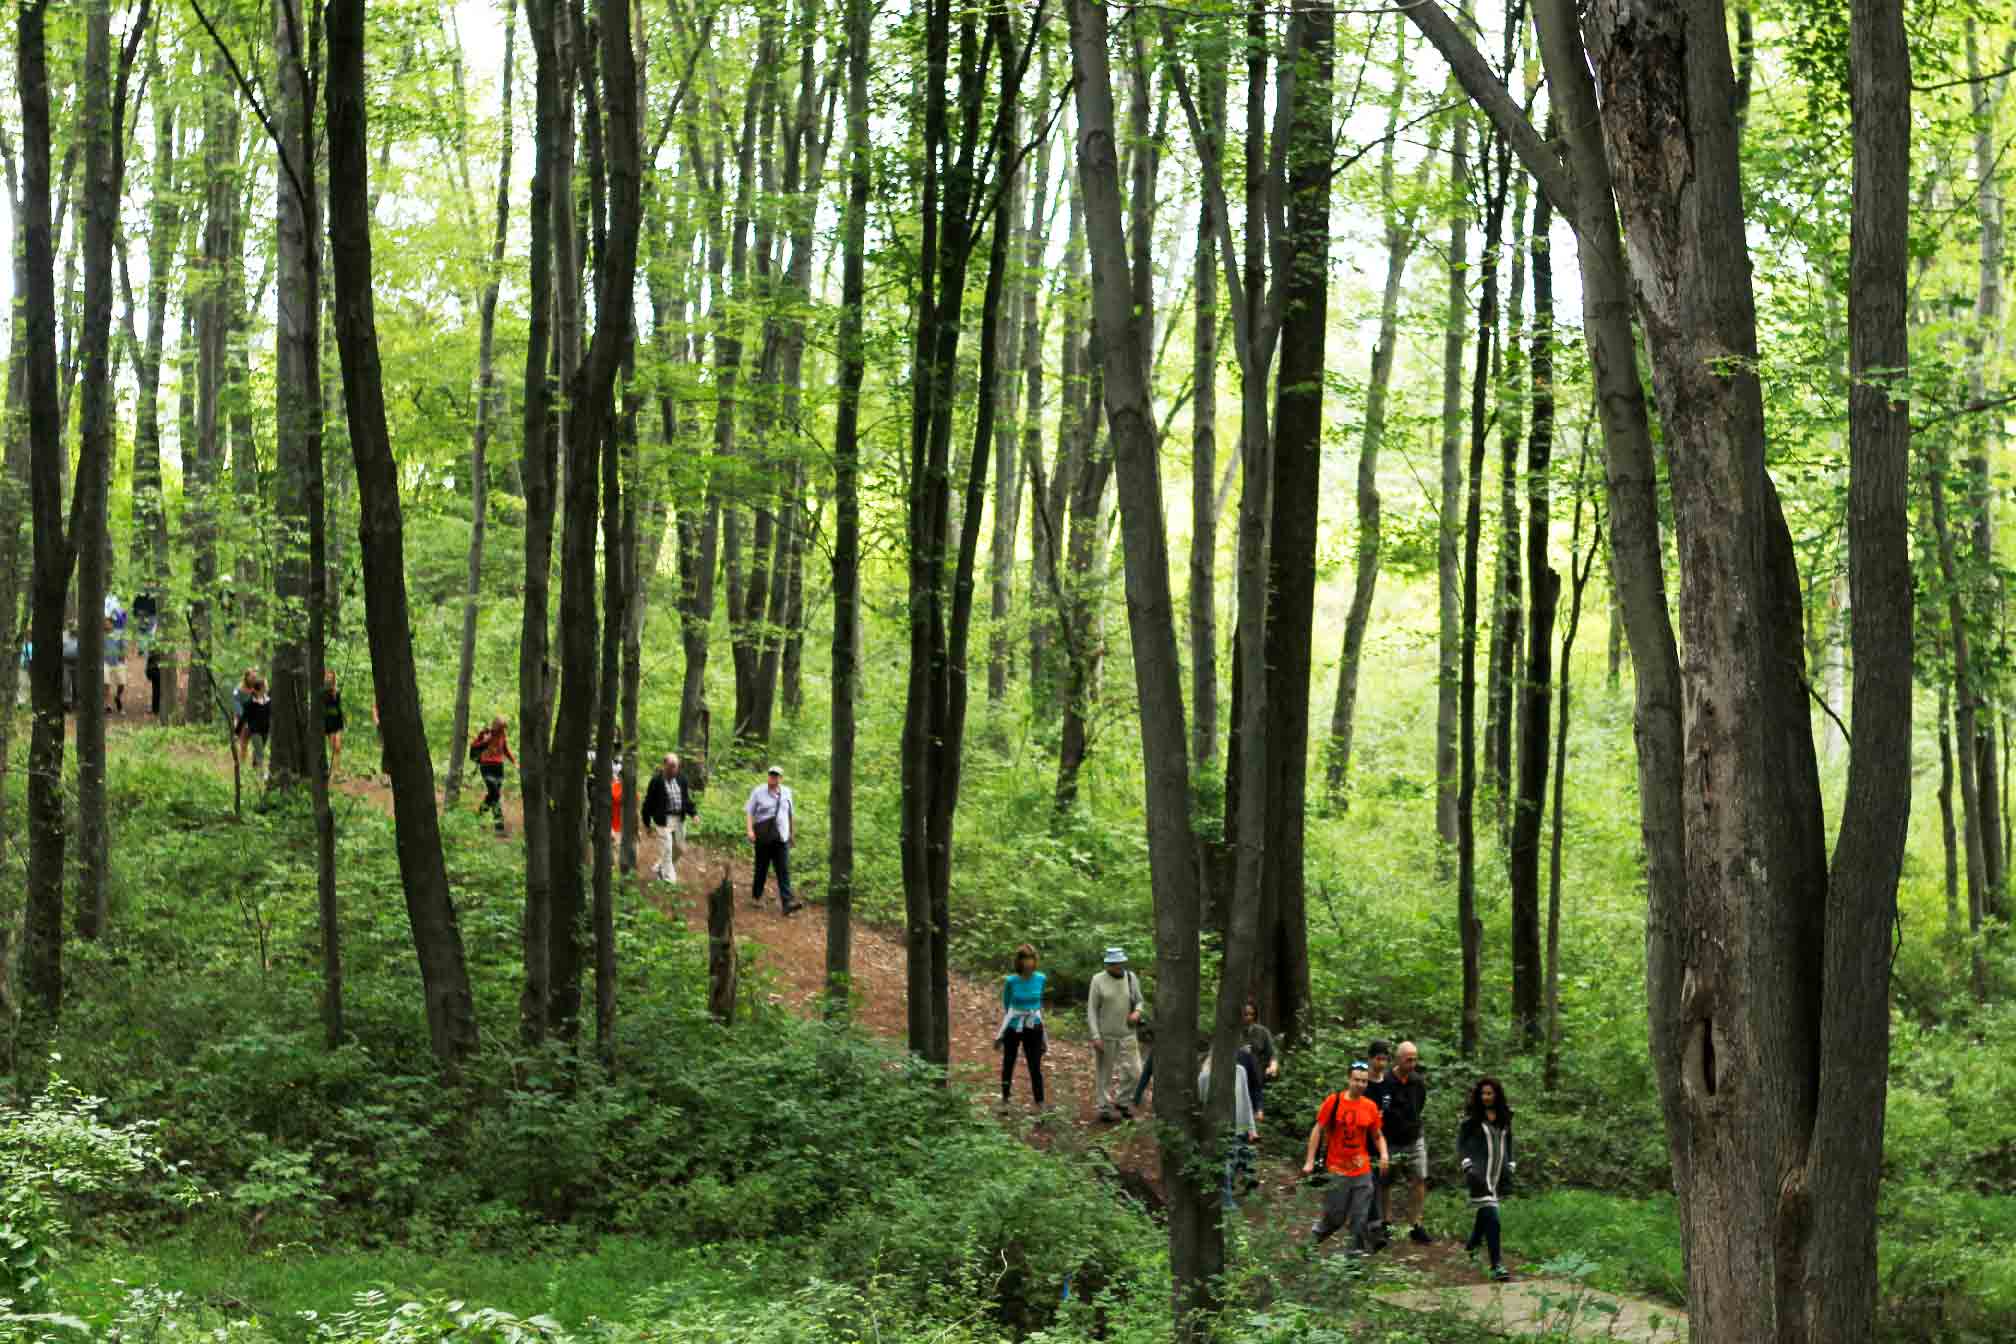 People using the hiking path at the Vassar Ecological Preserve